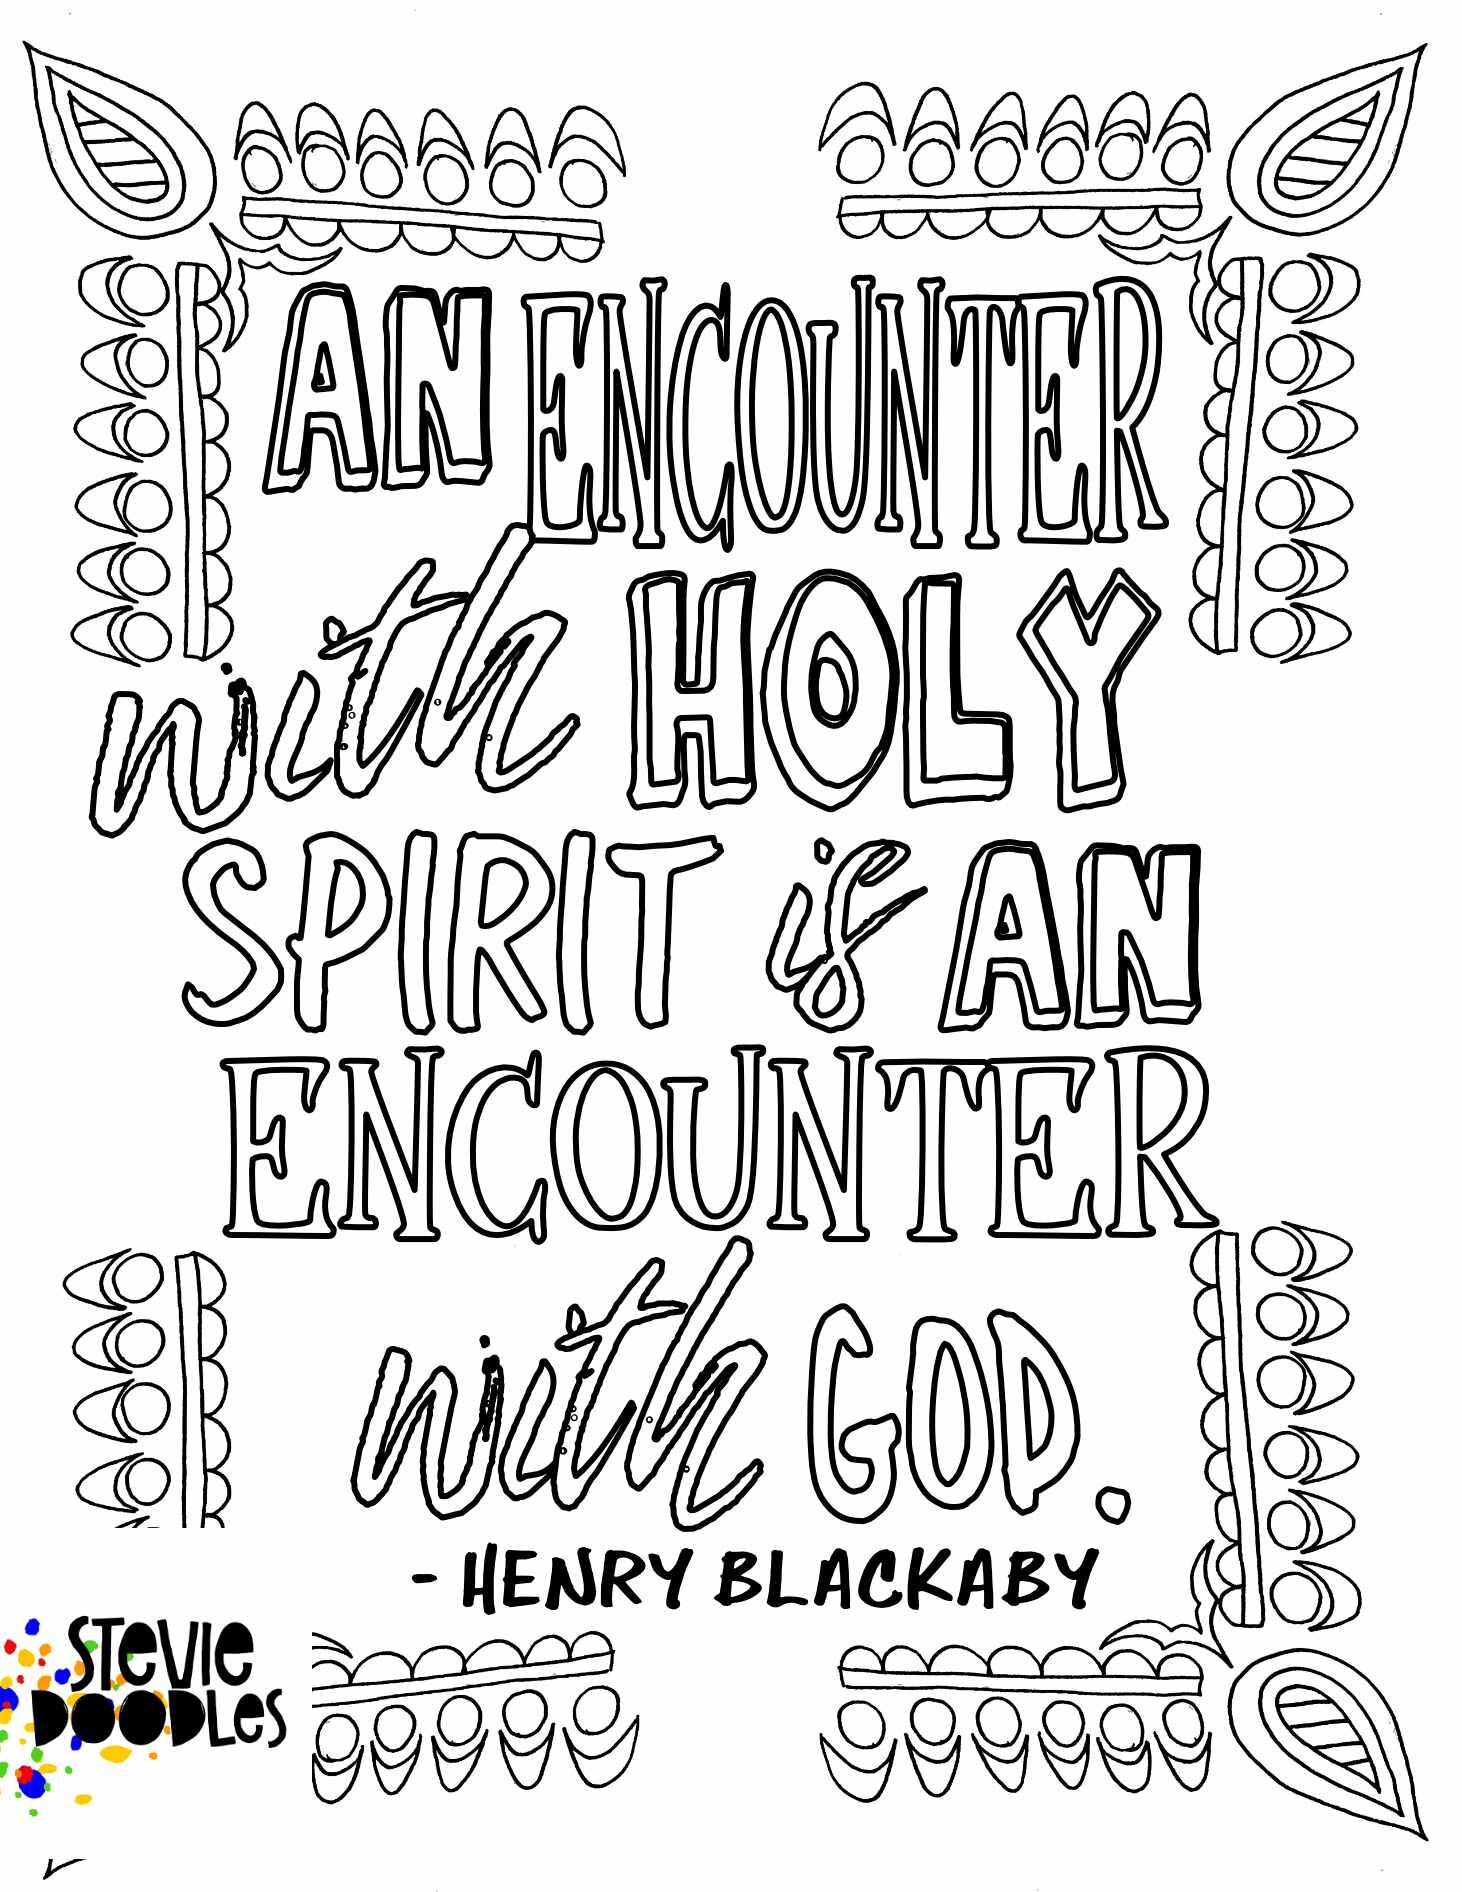 An Encounter With The Holy Spirit Is An Encounter With God Free Printable Christian Coloring Page - Inspired By Experiencing God